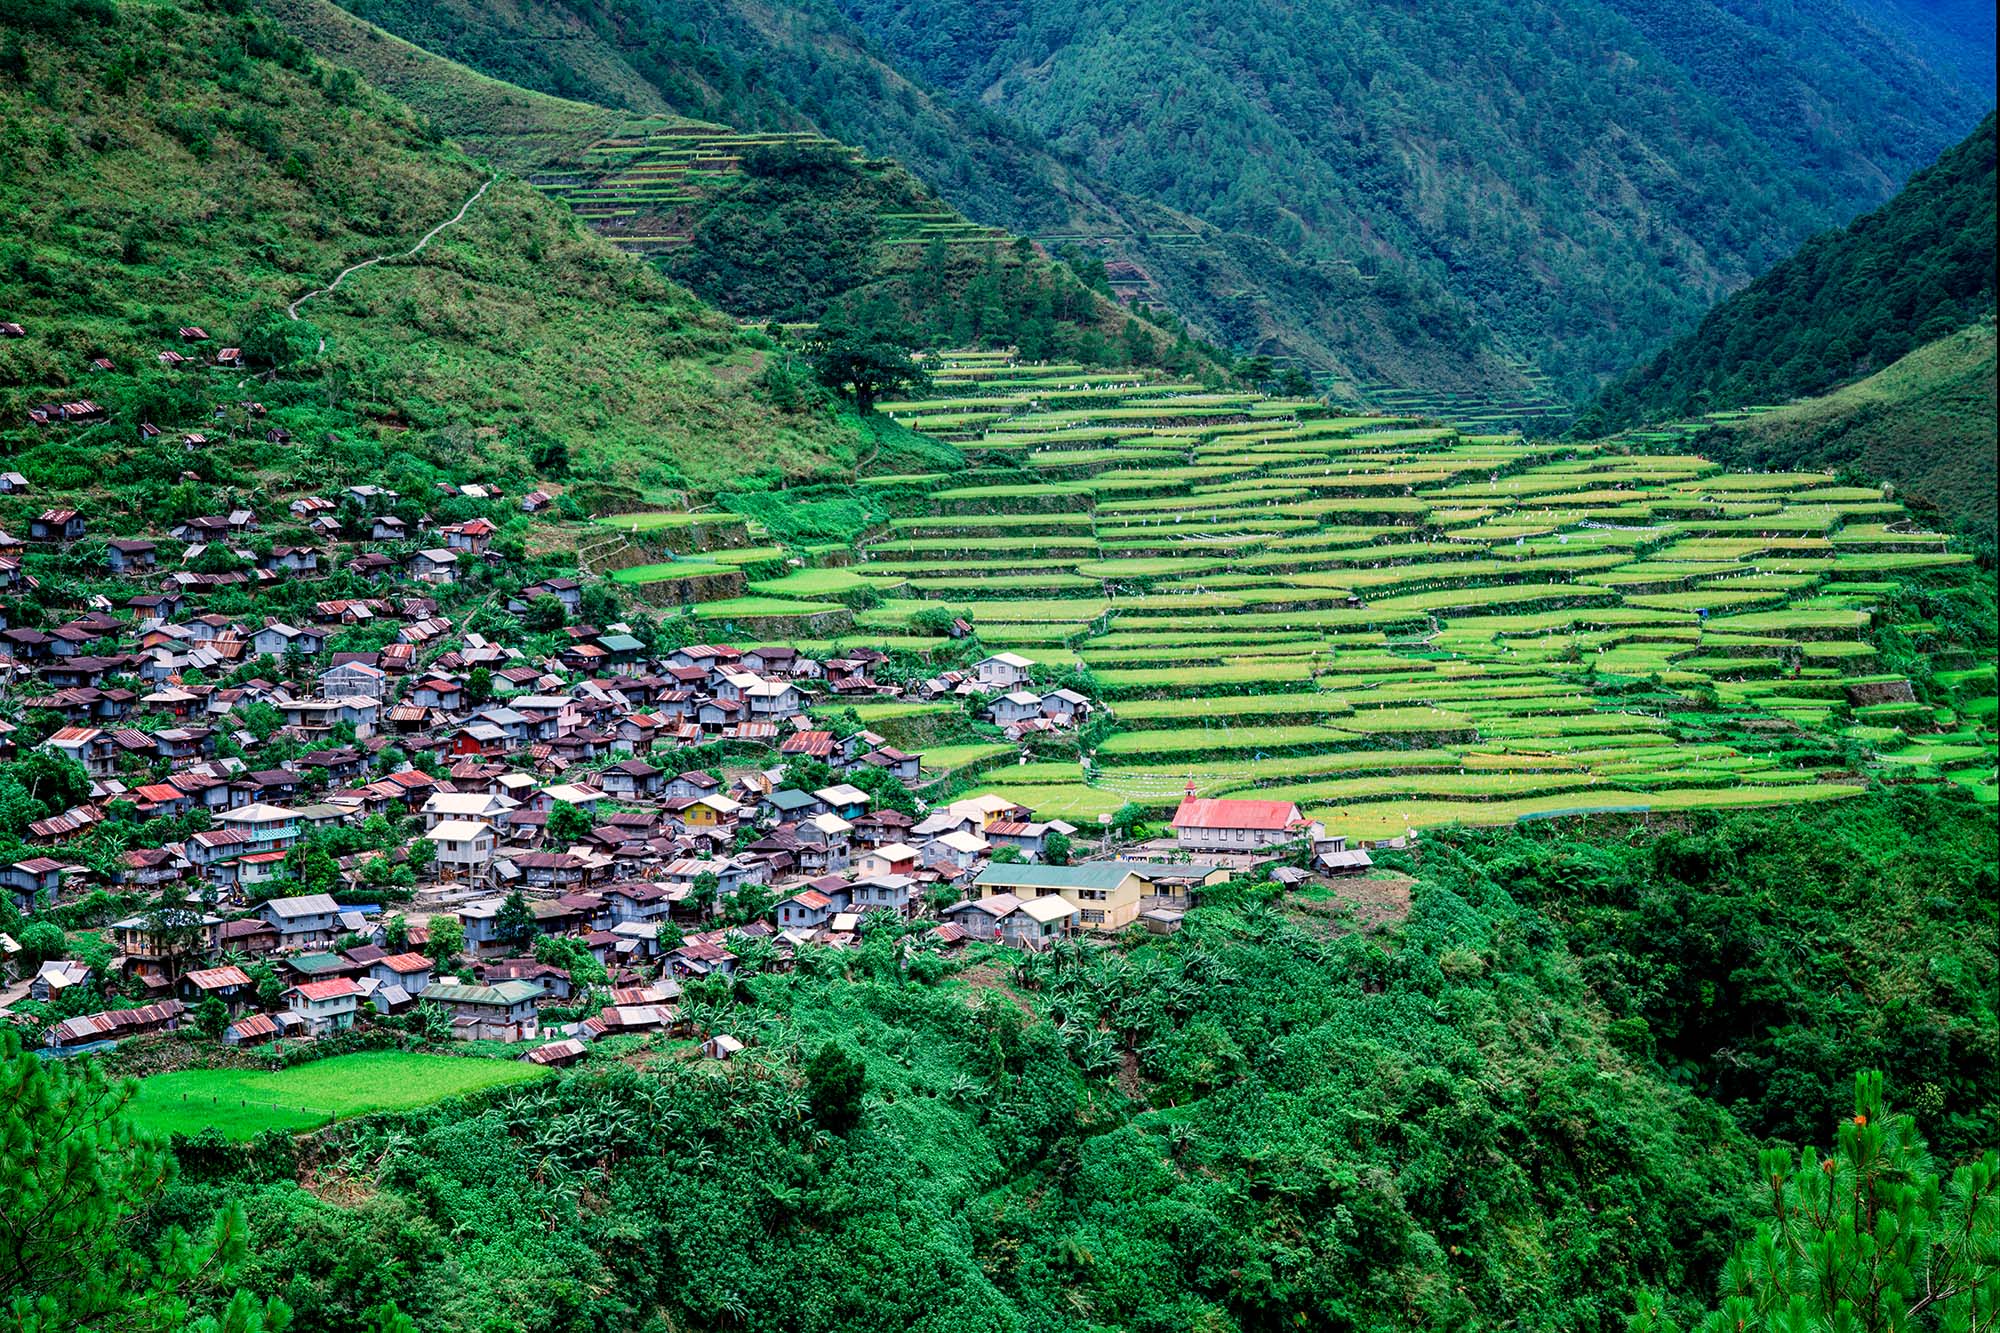 In the photograph "Bayyo's Tapestry: Philippine Rice Terraces," captured on Velvia 50 film with a Mamiya 7 camera, the intricate...